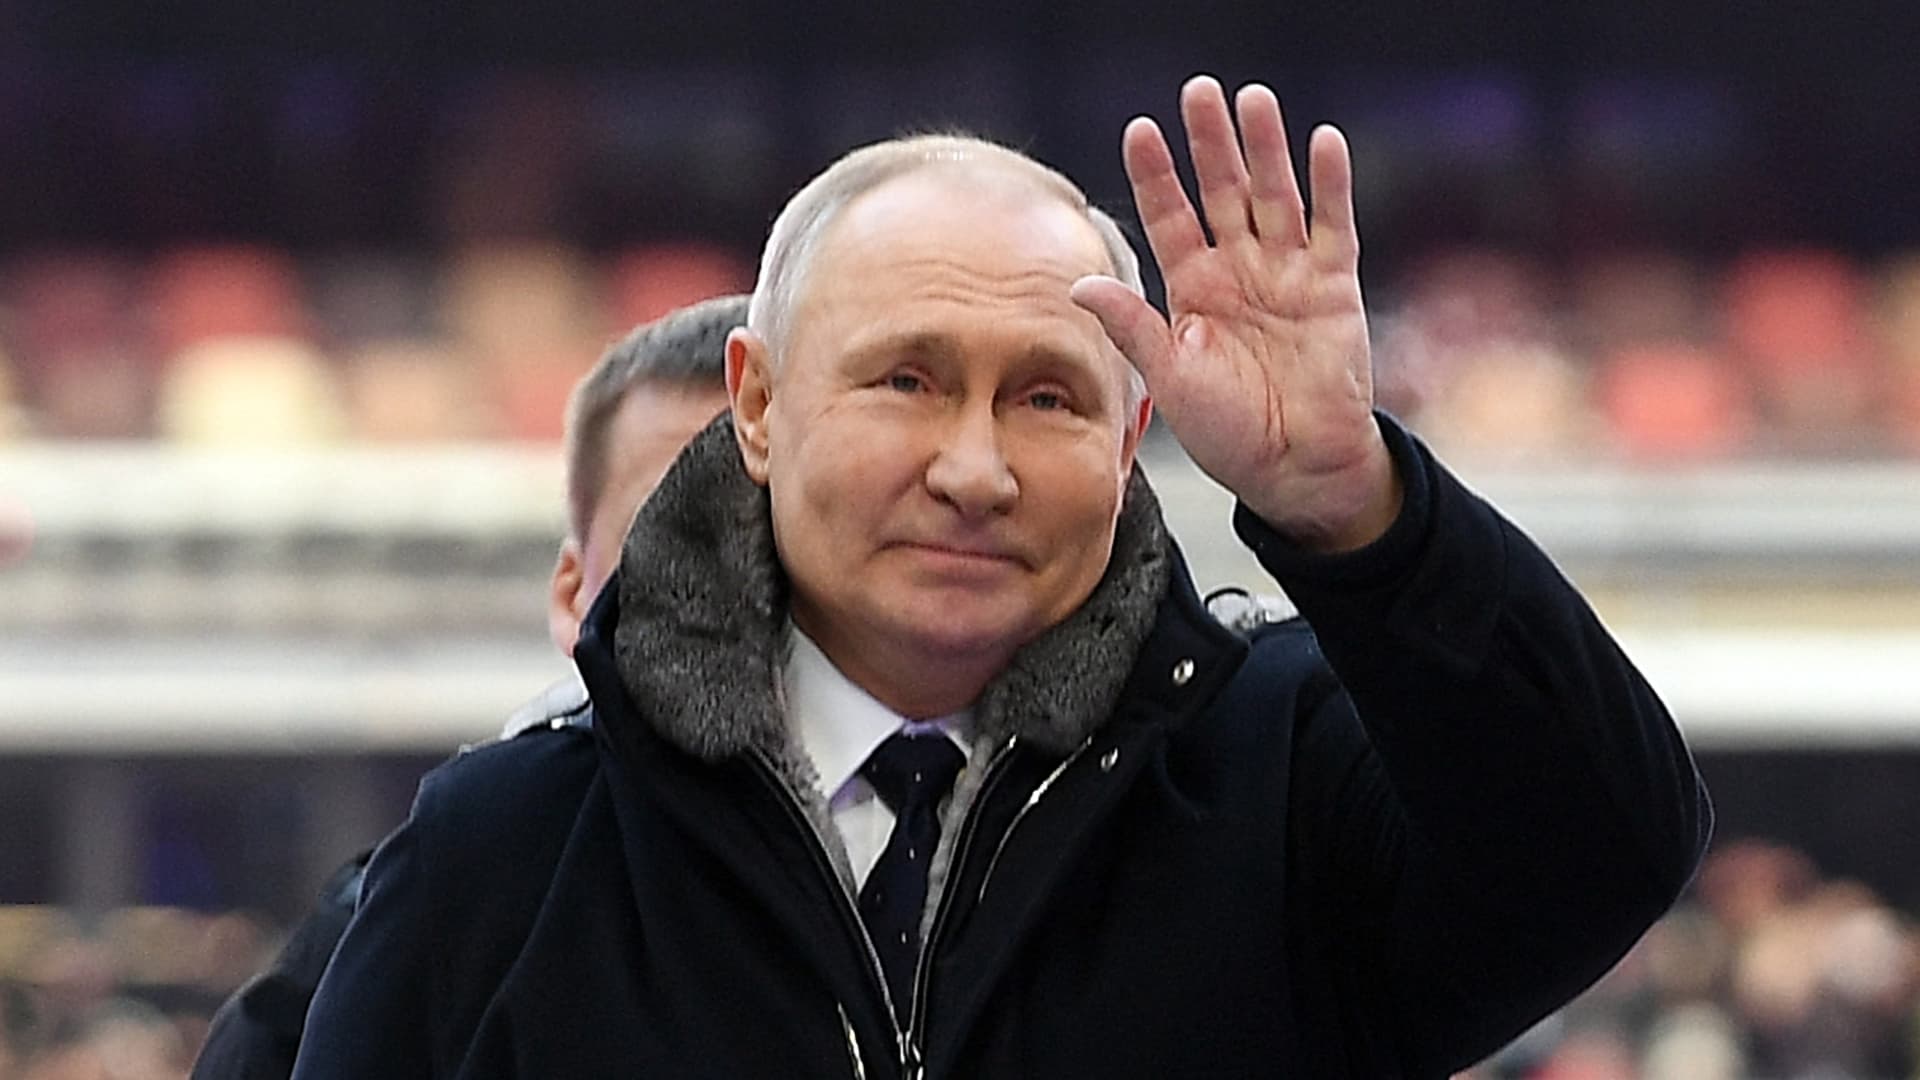 Russian President Vladimir Putin attends a patriotic concert dedicated to the upcoming Defender of the Fatherland Day at the Luzhniki stadium in Moscow on February 22, 2023.